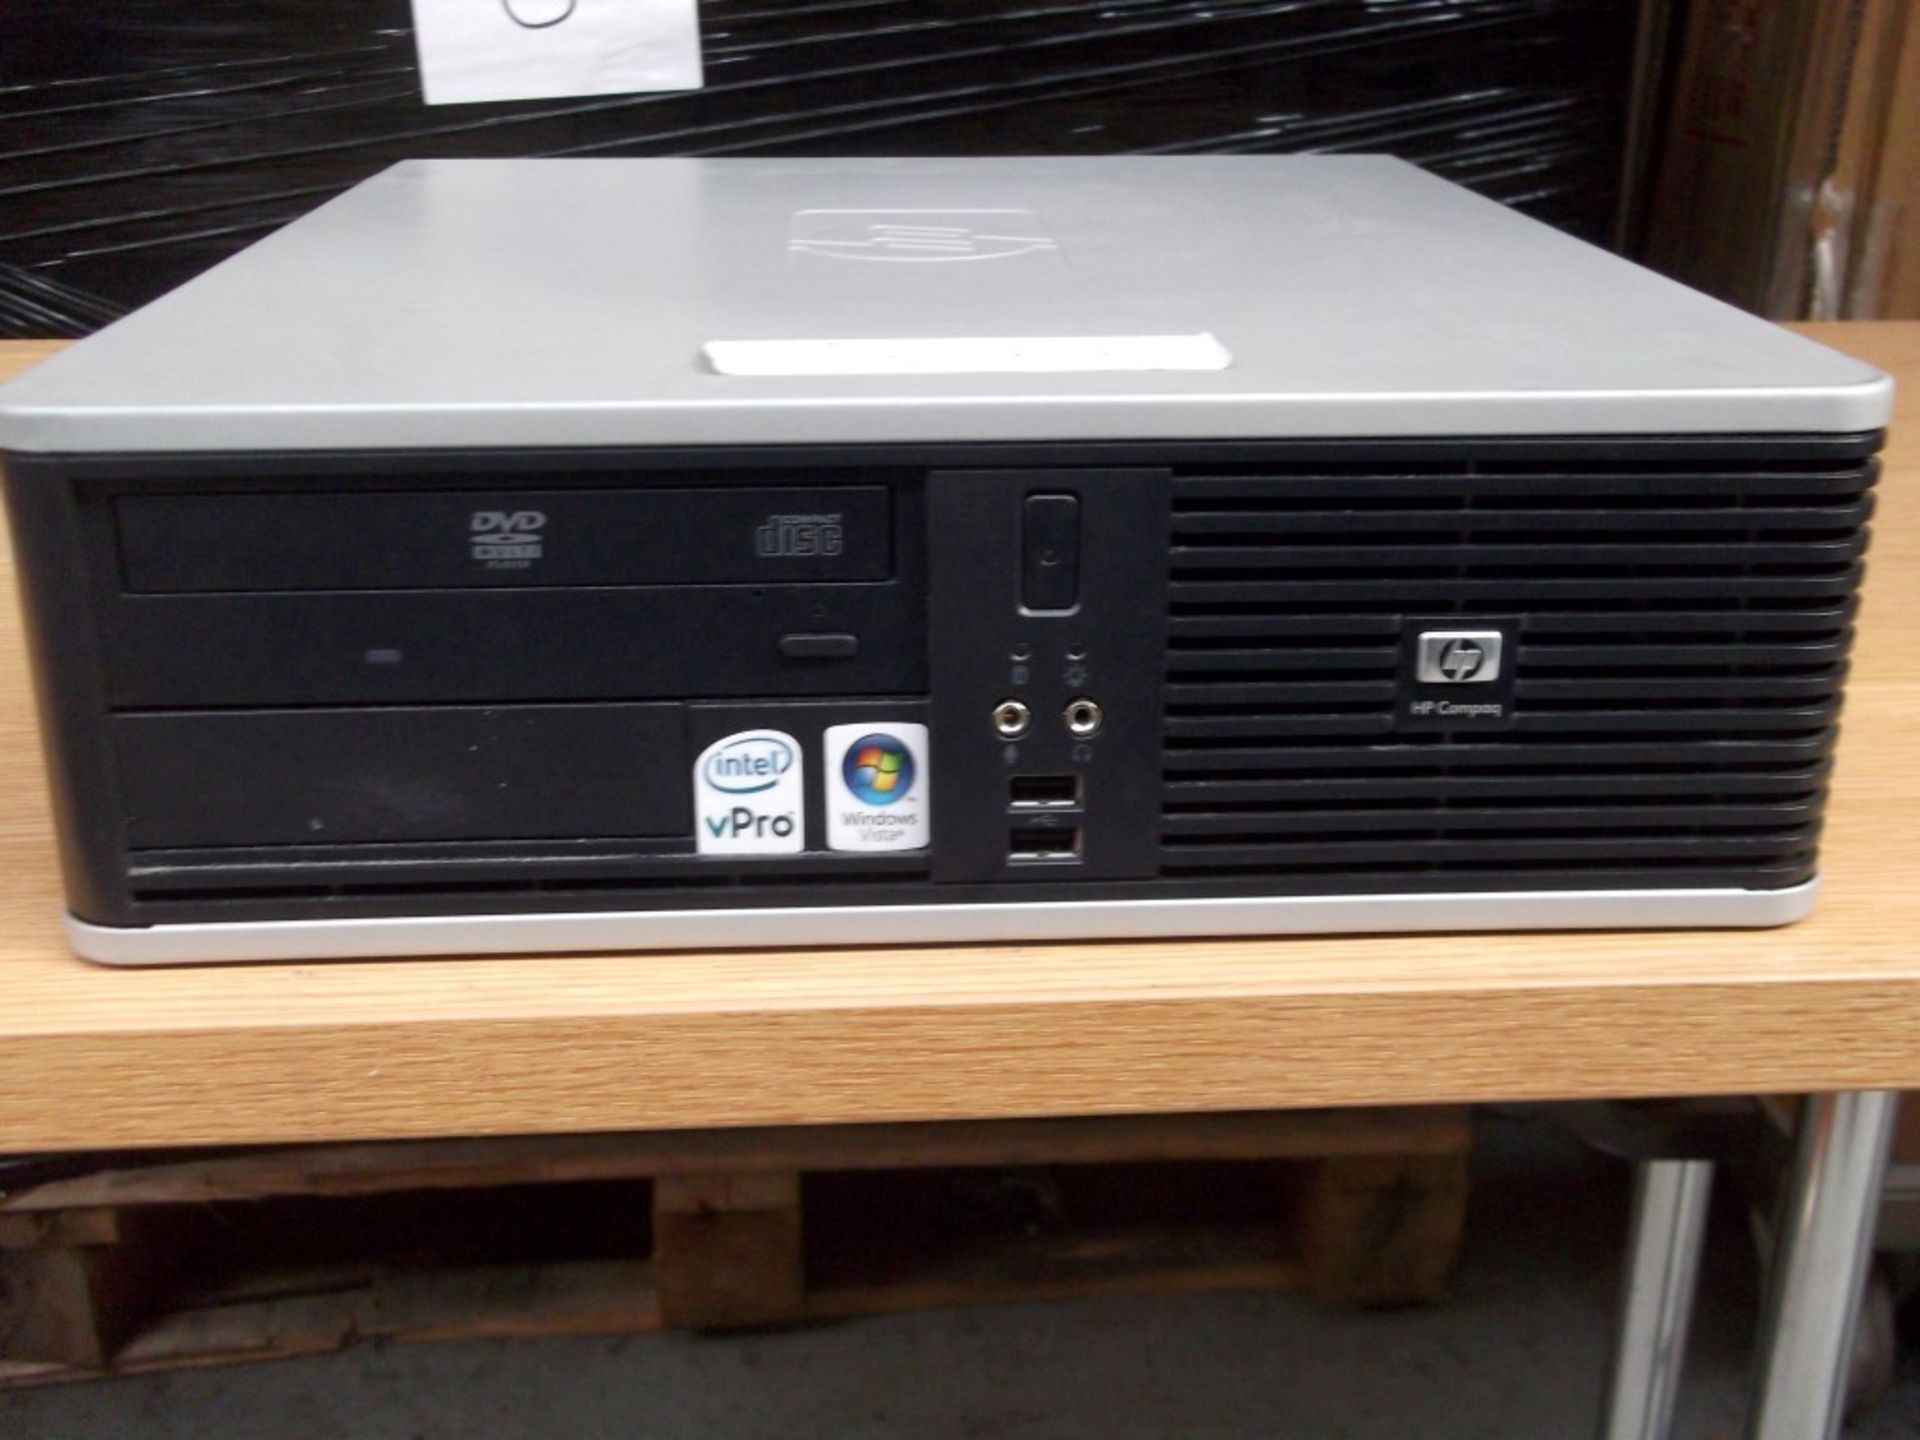 1 x HP DC7800 Desktop Computer - Intel Core 2 Duo 2.66 Ghz / 4gb Ram - HARD DISK DRIVE REMOVED - - Image 7 of 7